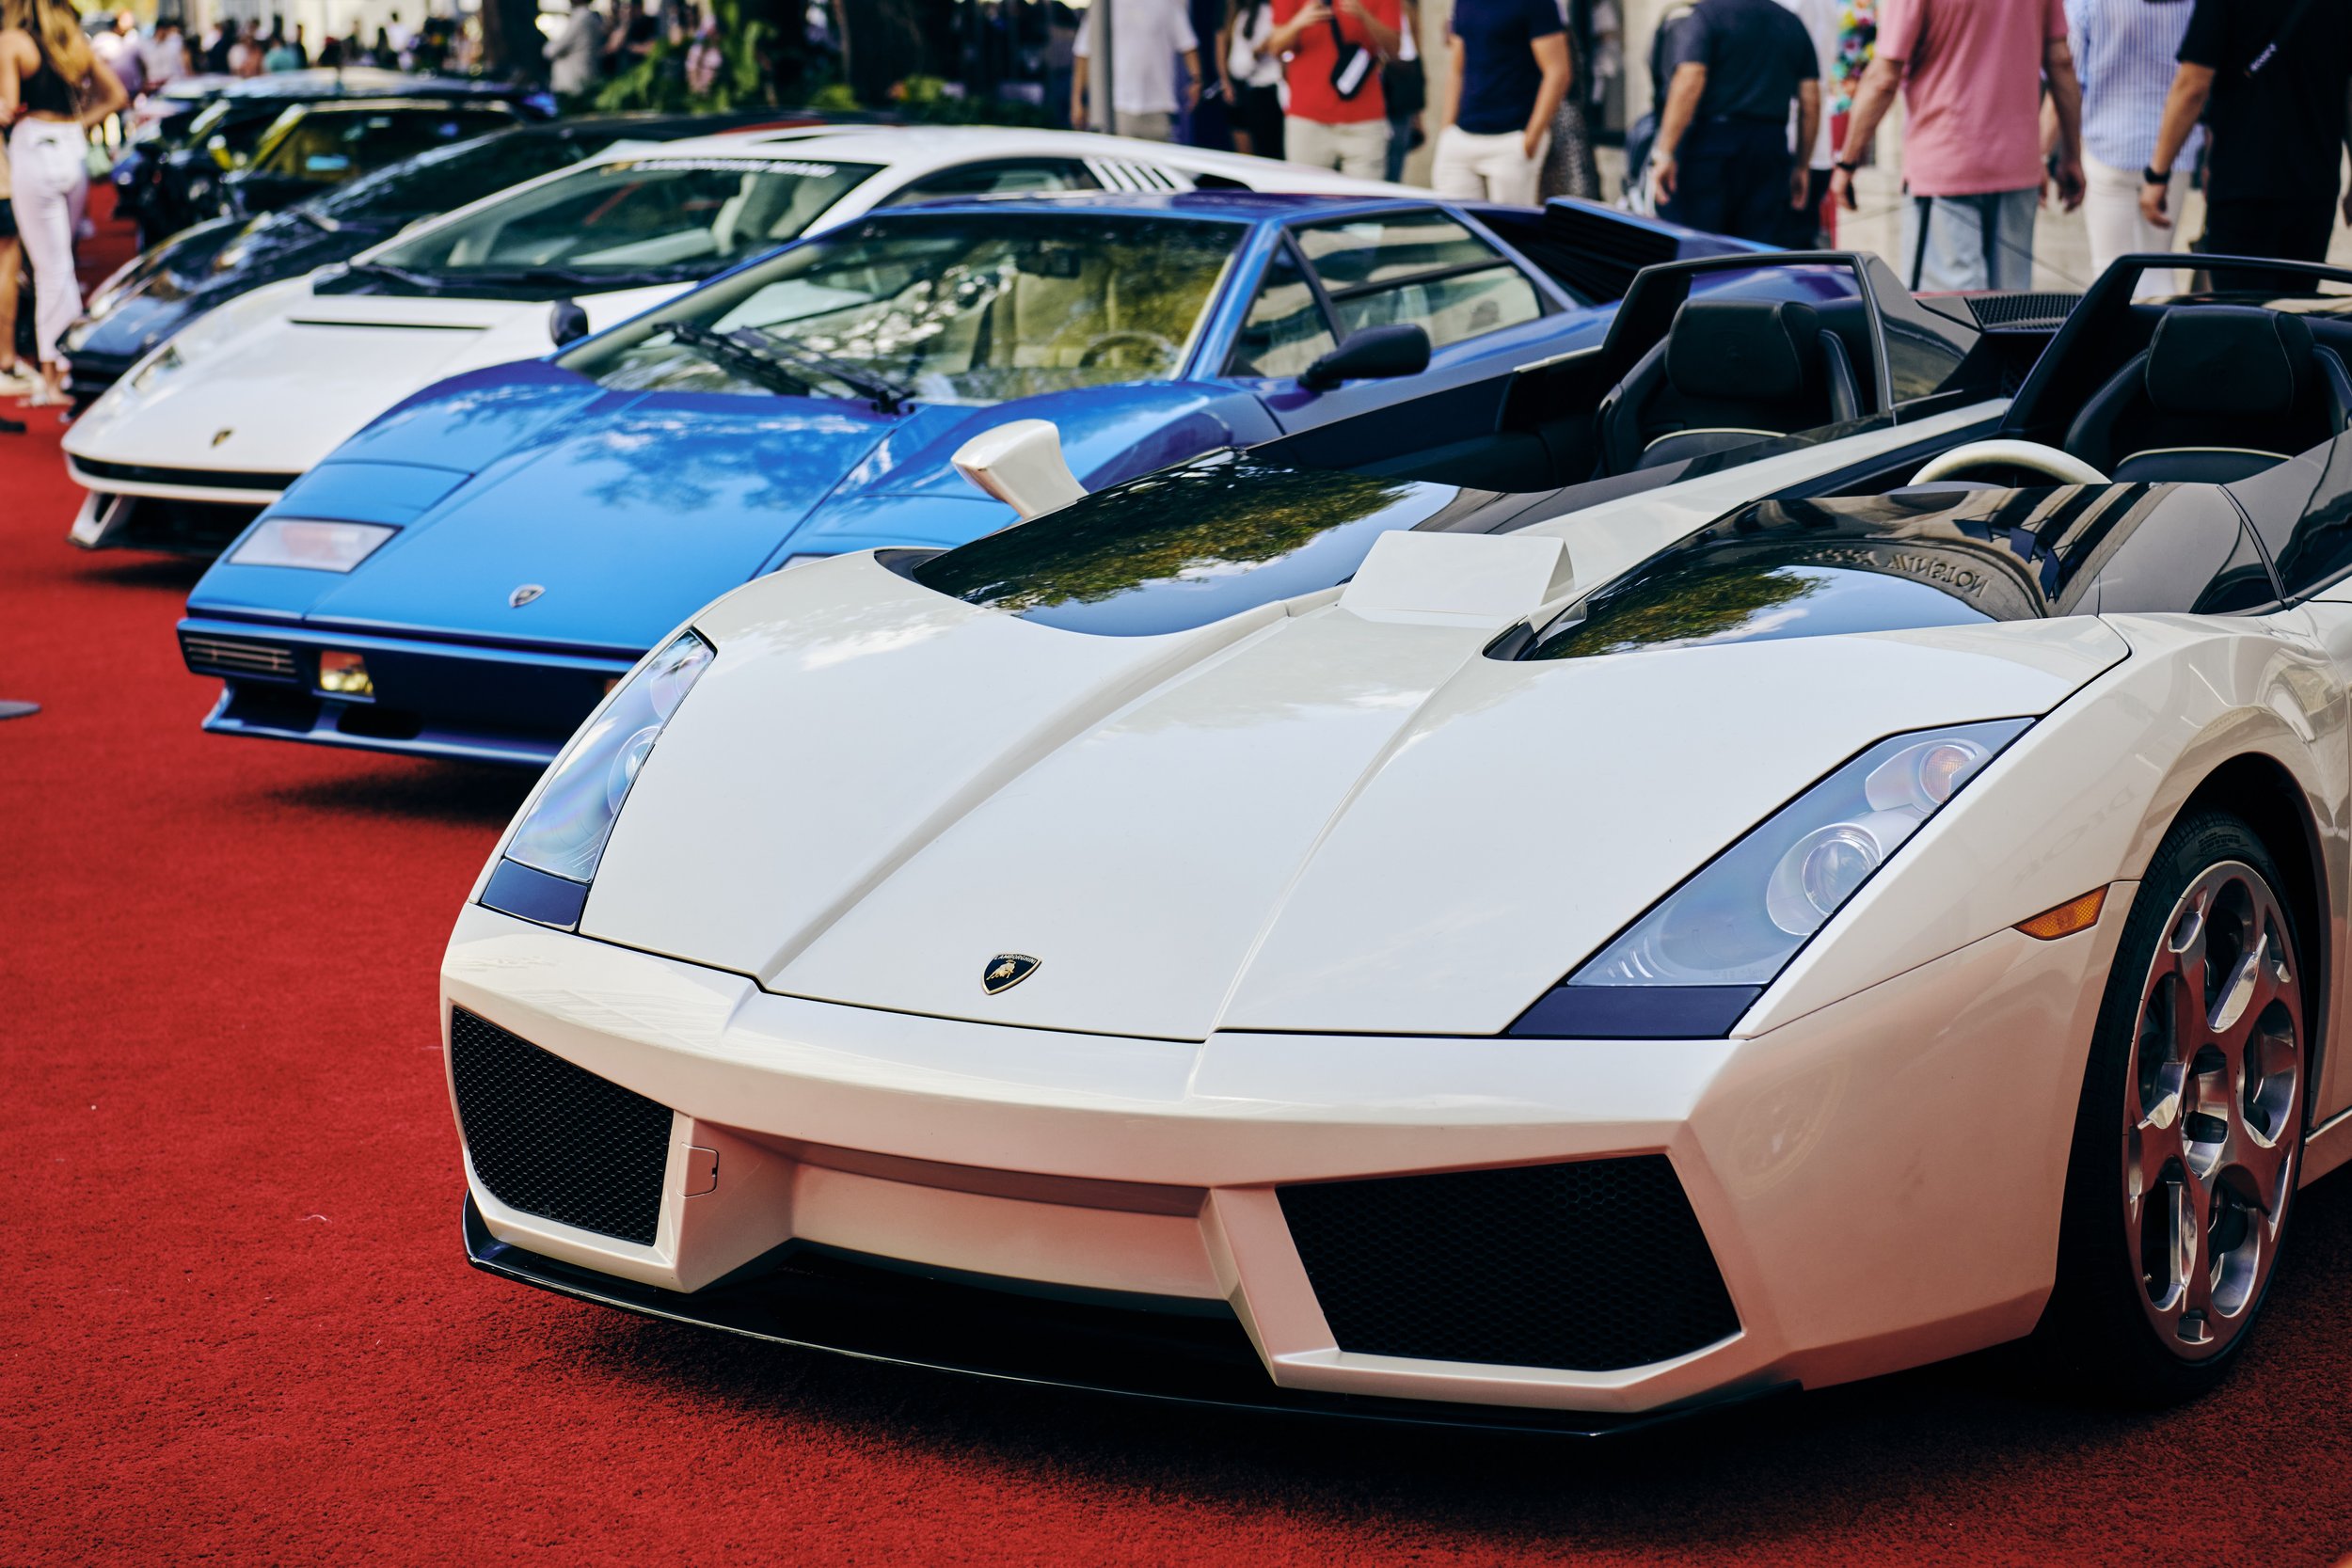 The Sixth Annual Miami Concours: A Distinctly Modern Concours D